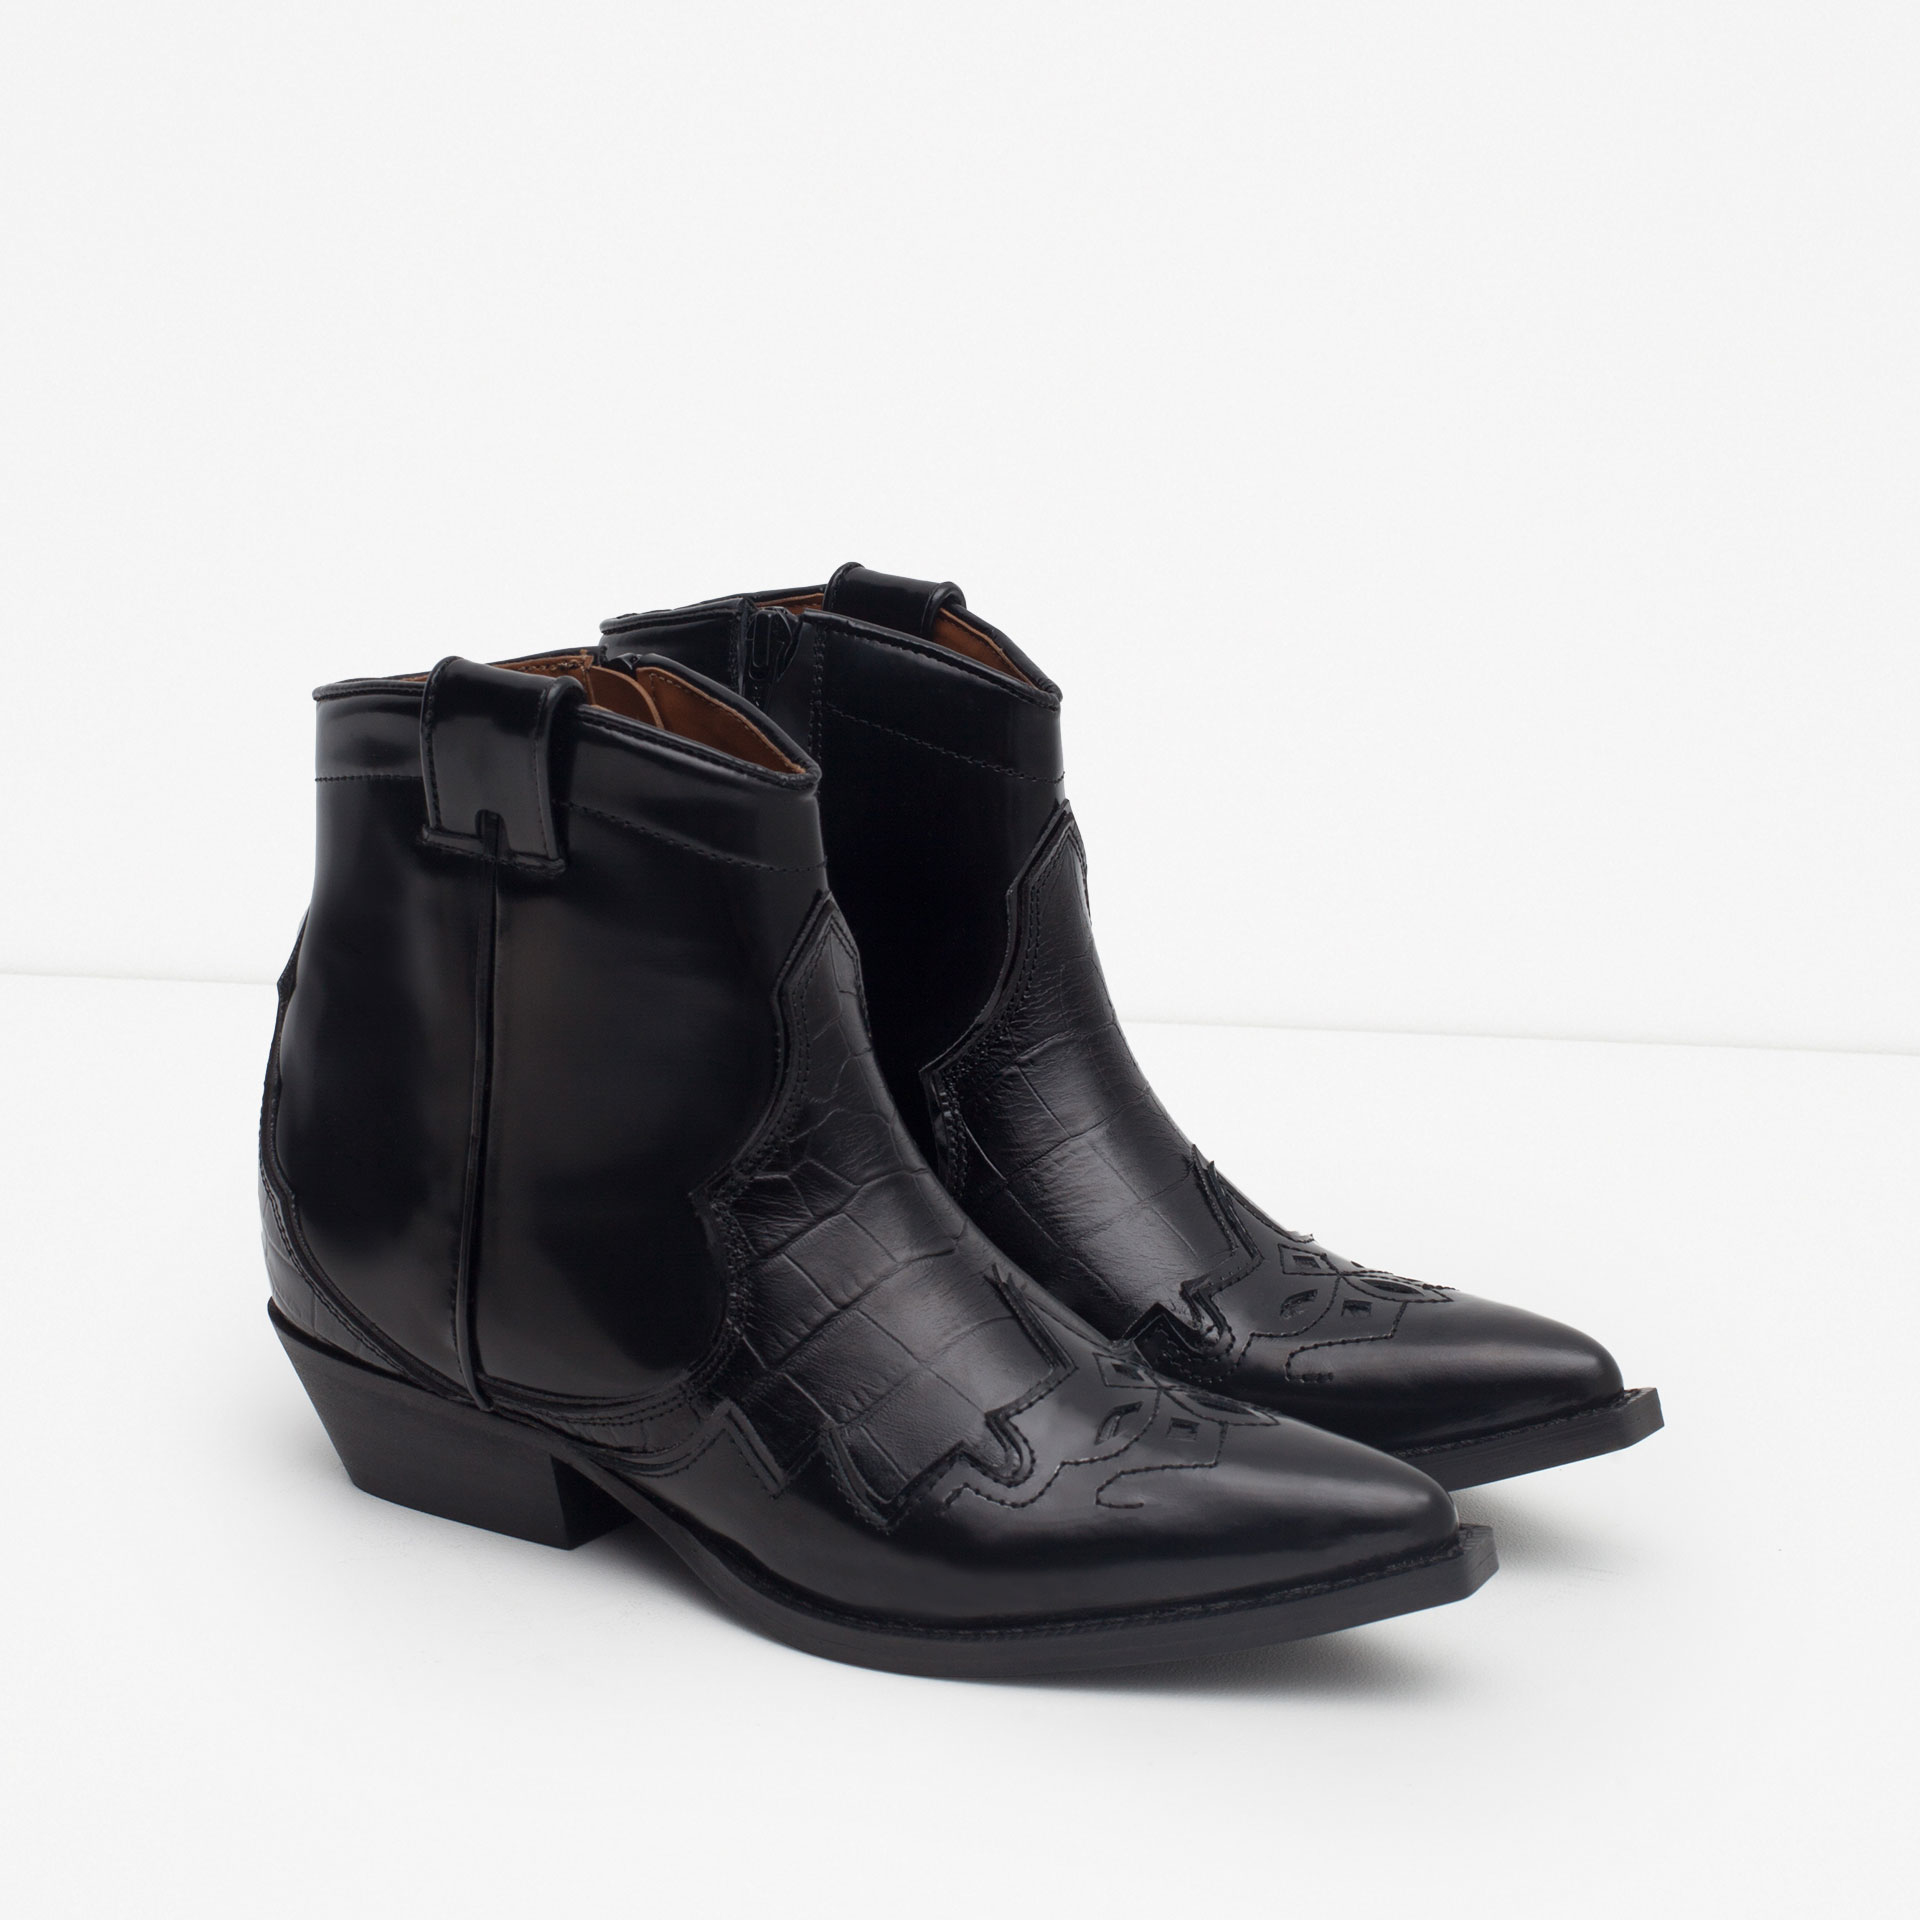 Zara Leather Cowboy Ankle Boots in Black | Lyst